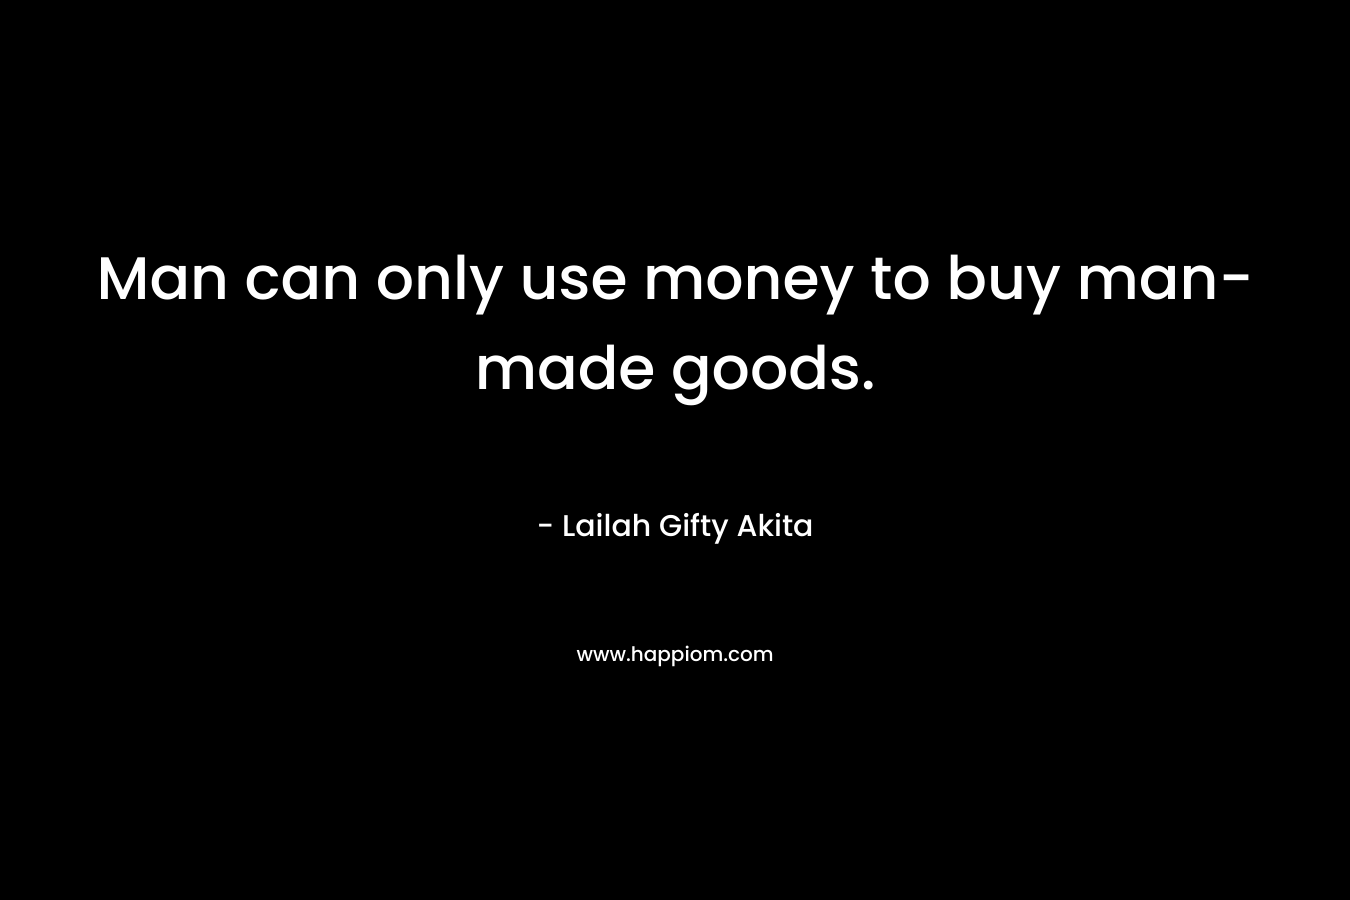 Man can only use money to buy man-made goods. – Lailah Gifty Akita